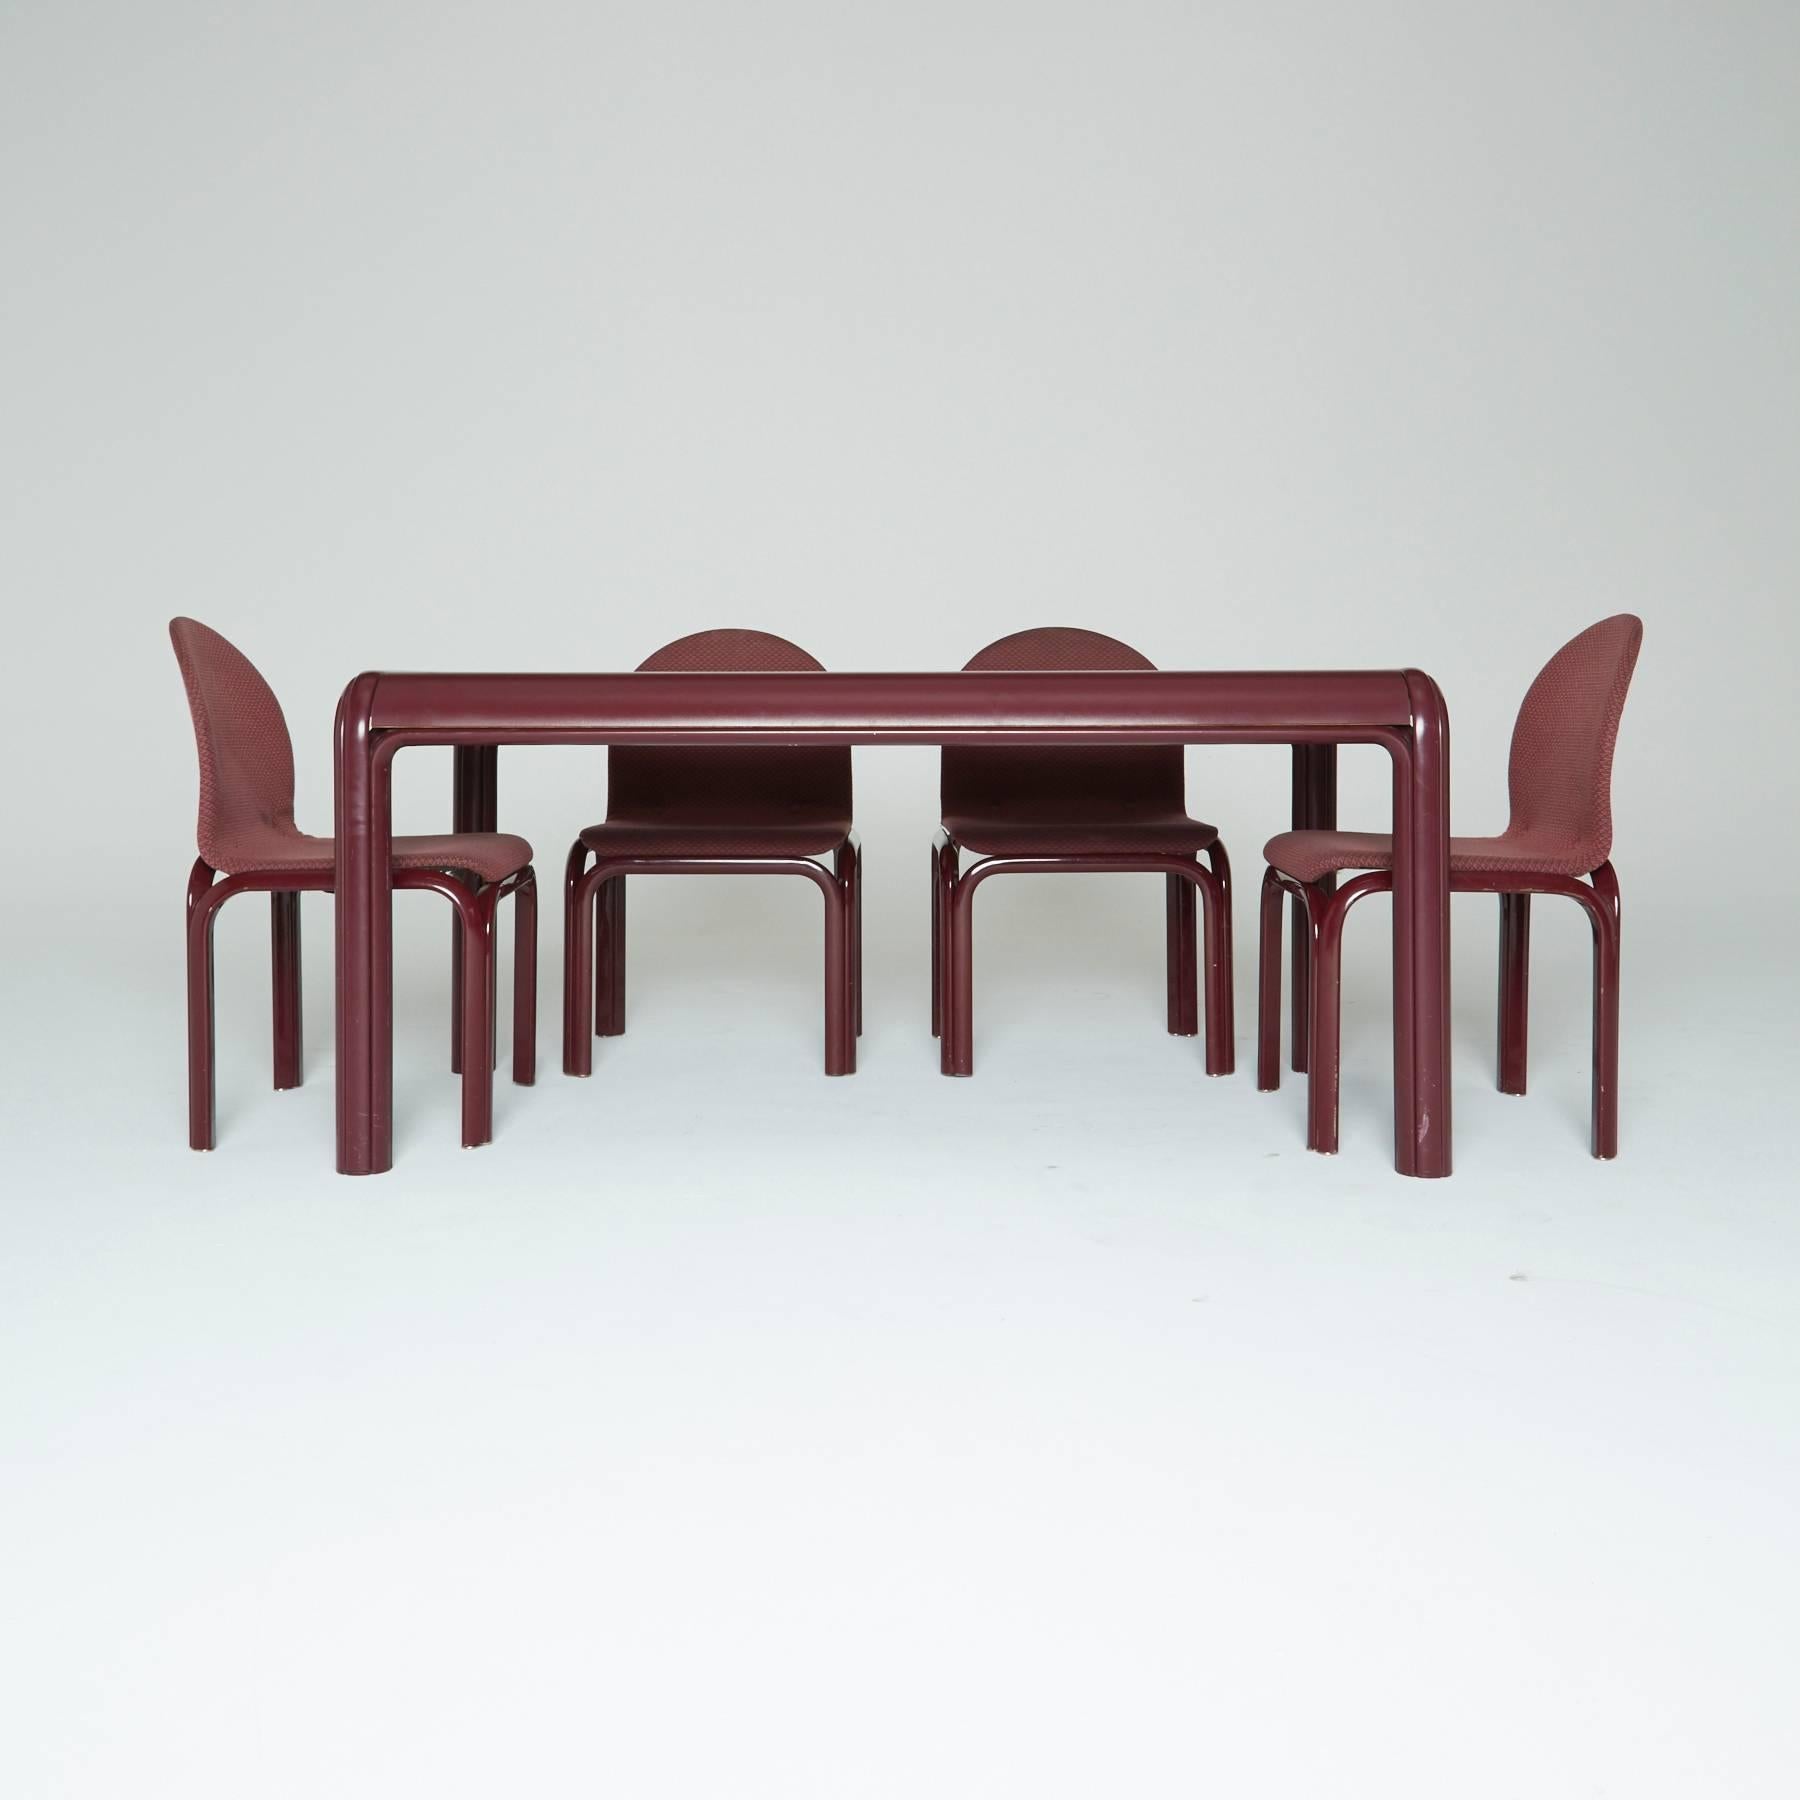 Created by one of the few female members of the postwar Italian modern movement, Gae Aulenti for Knoll International, circa 1970. This complete burgundy dining set is quite a rare find.

The frames of the six chairs are constructed by sculpted